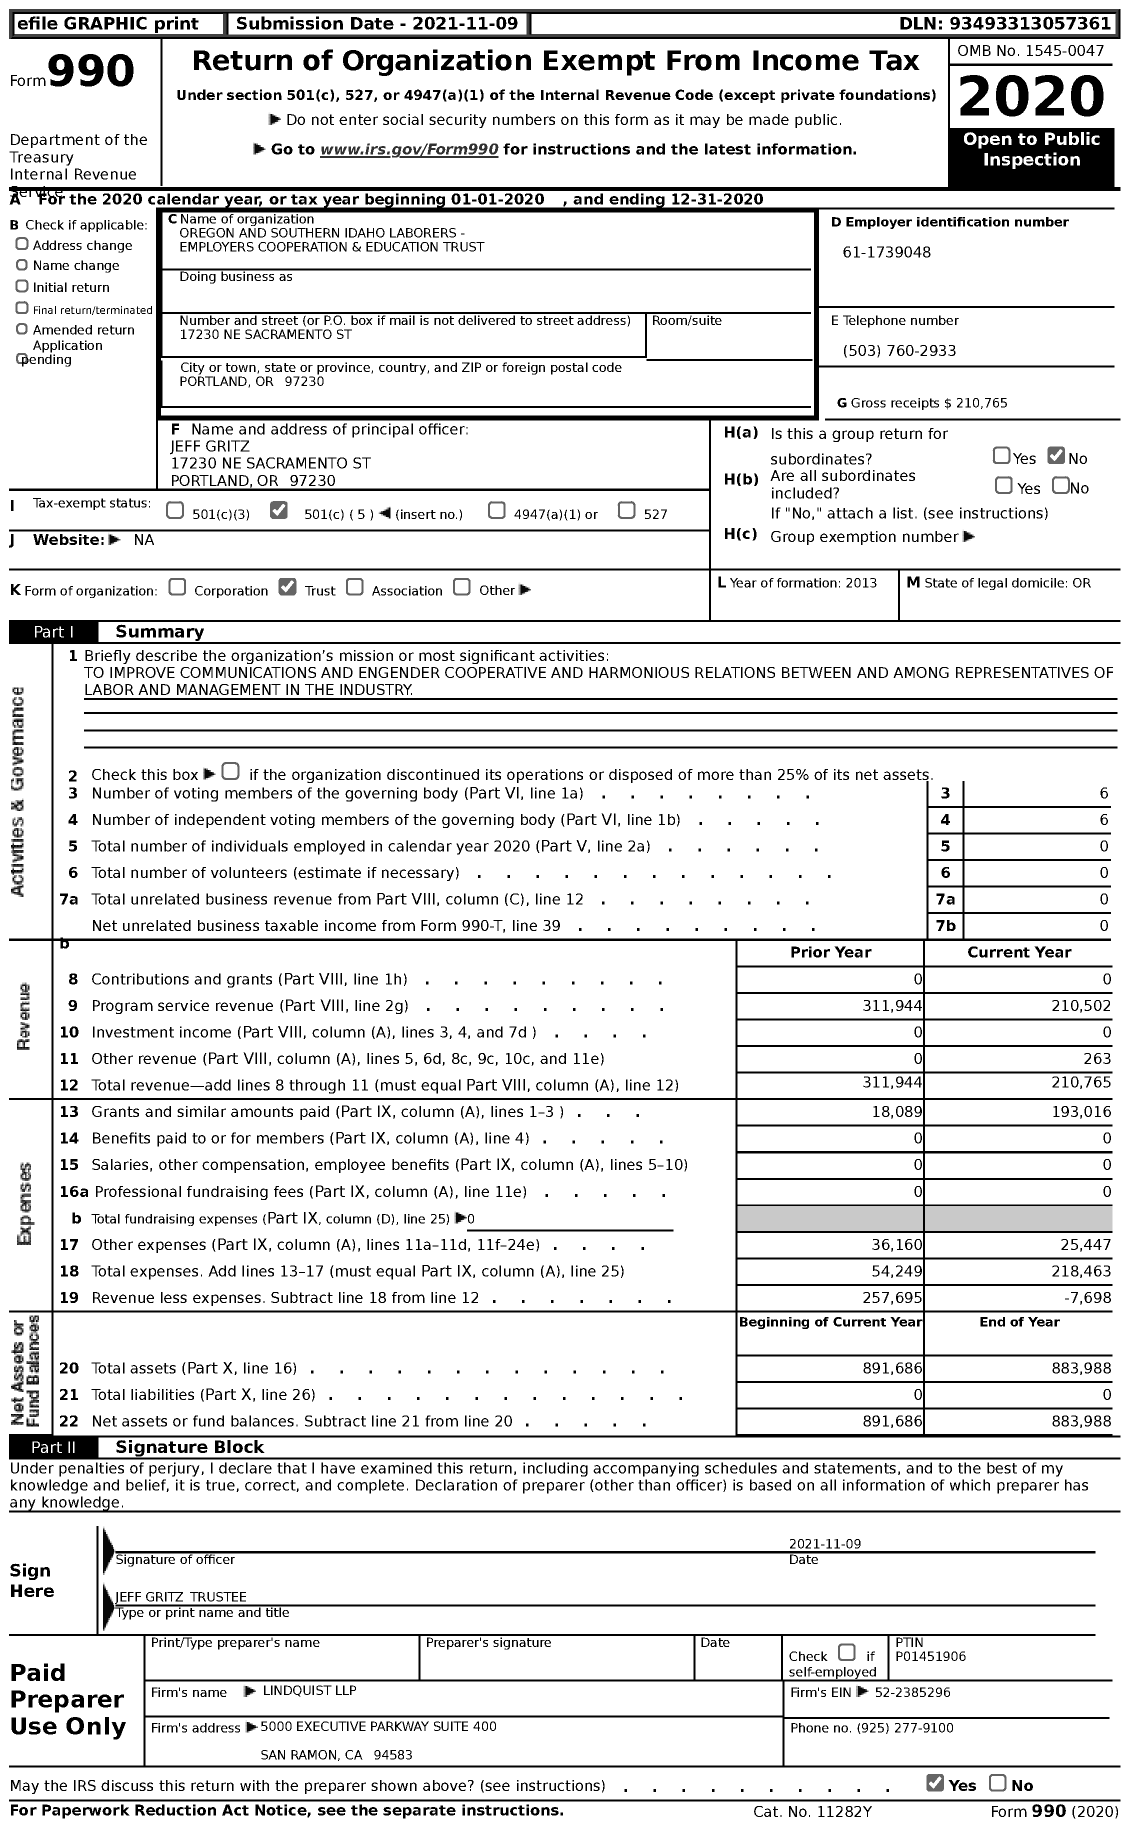 Image of first page of 2020 Form 990 for Oregon and Southern Idaho Laborers - Employers Cooperation and Education Trust